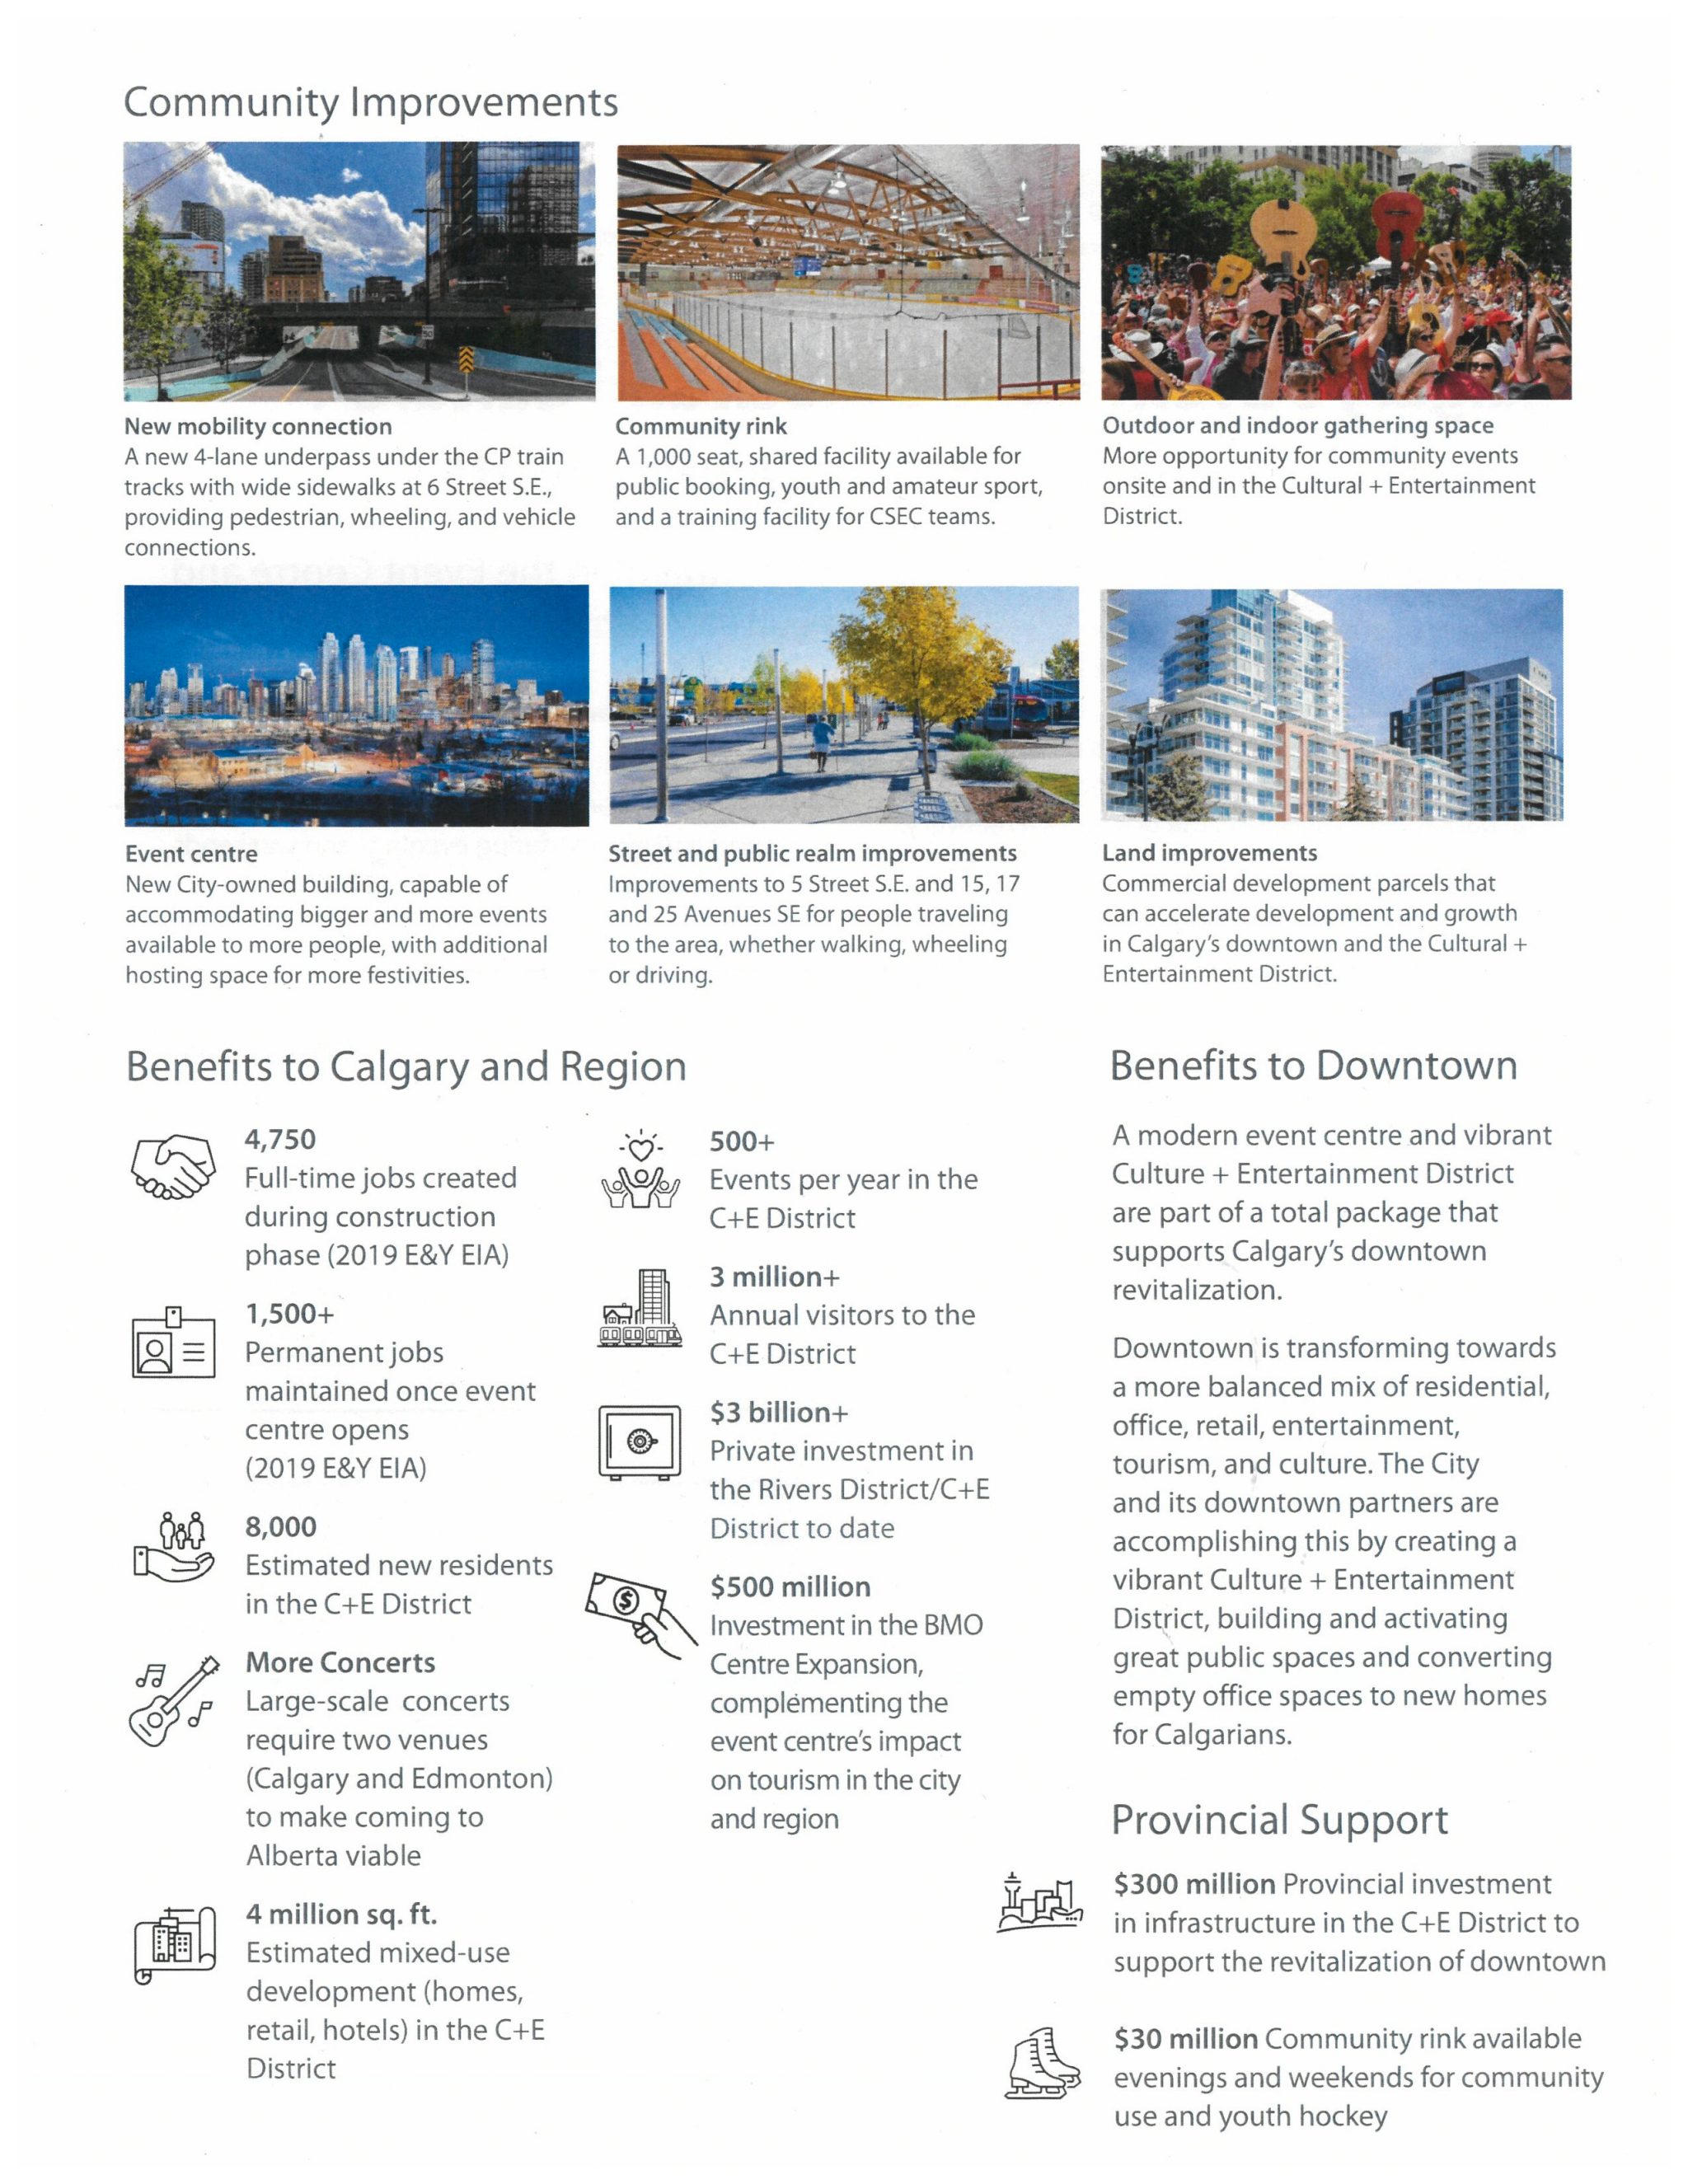 List of community improvement projects and the benefits to Calgary & Region